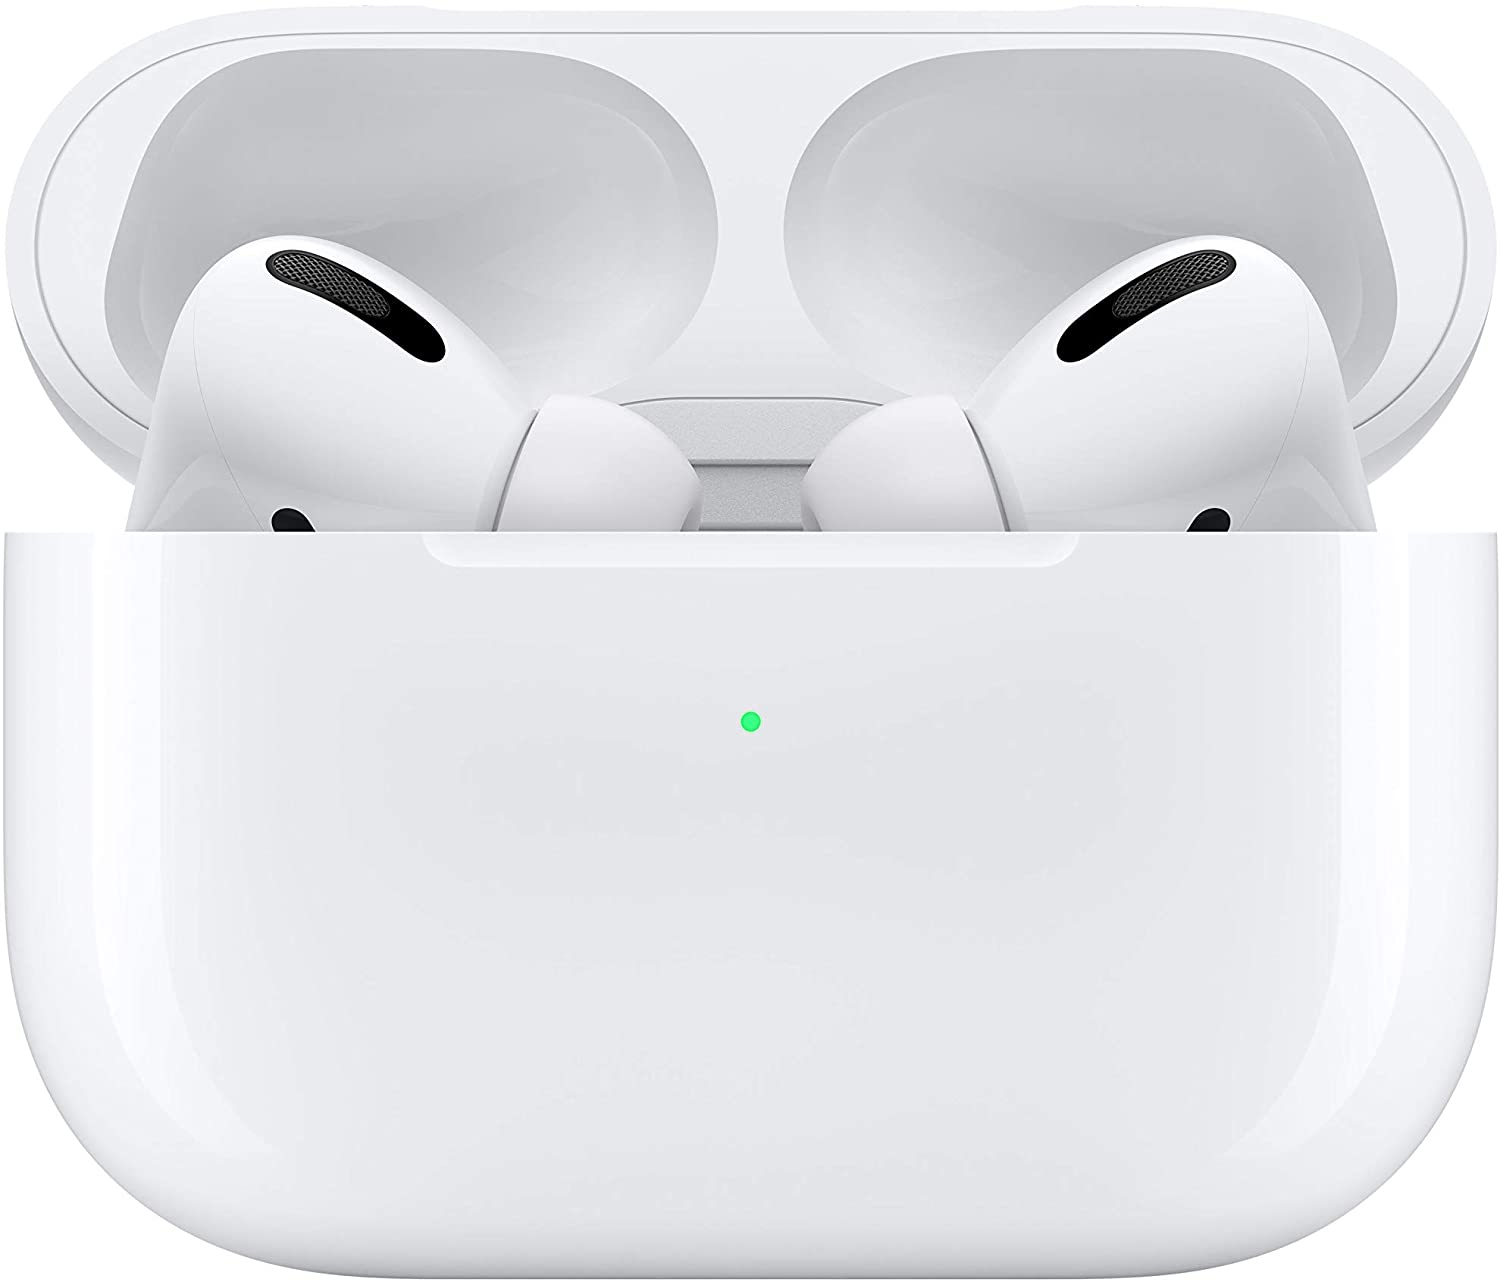 apple airpods pro - a photo